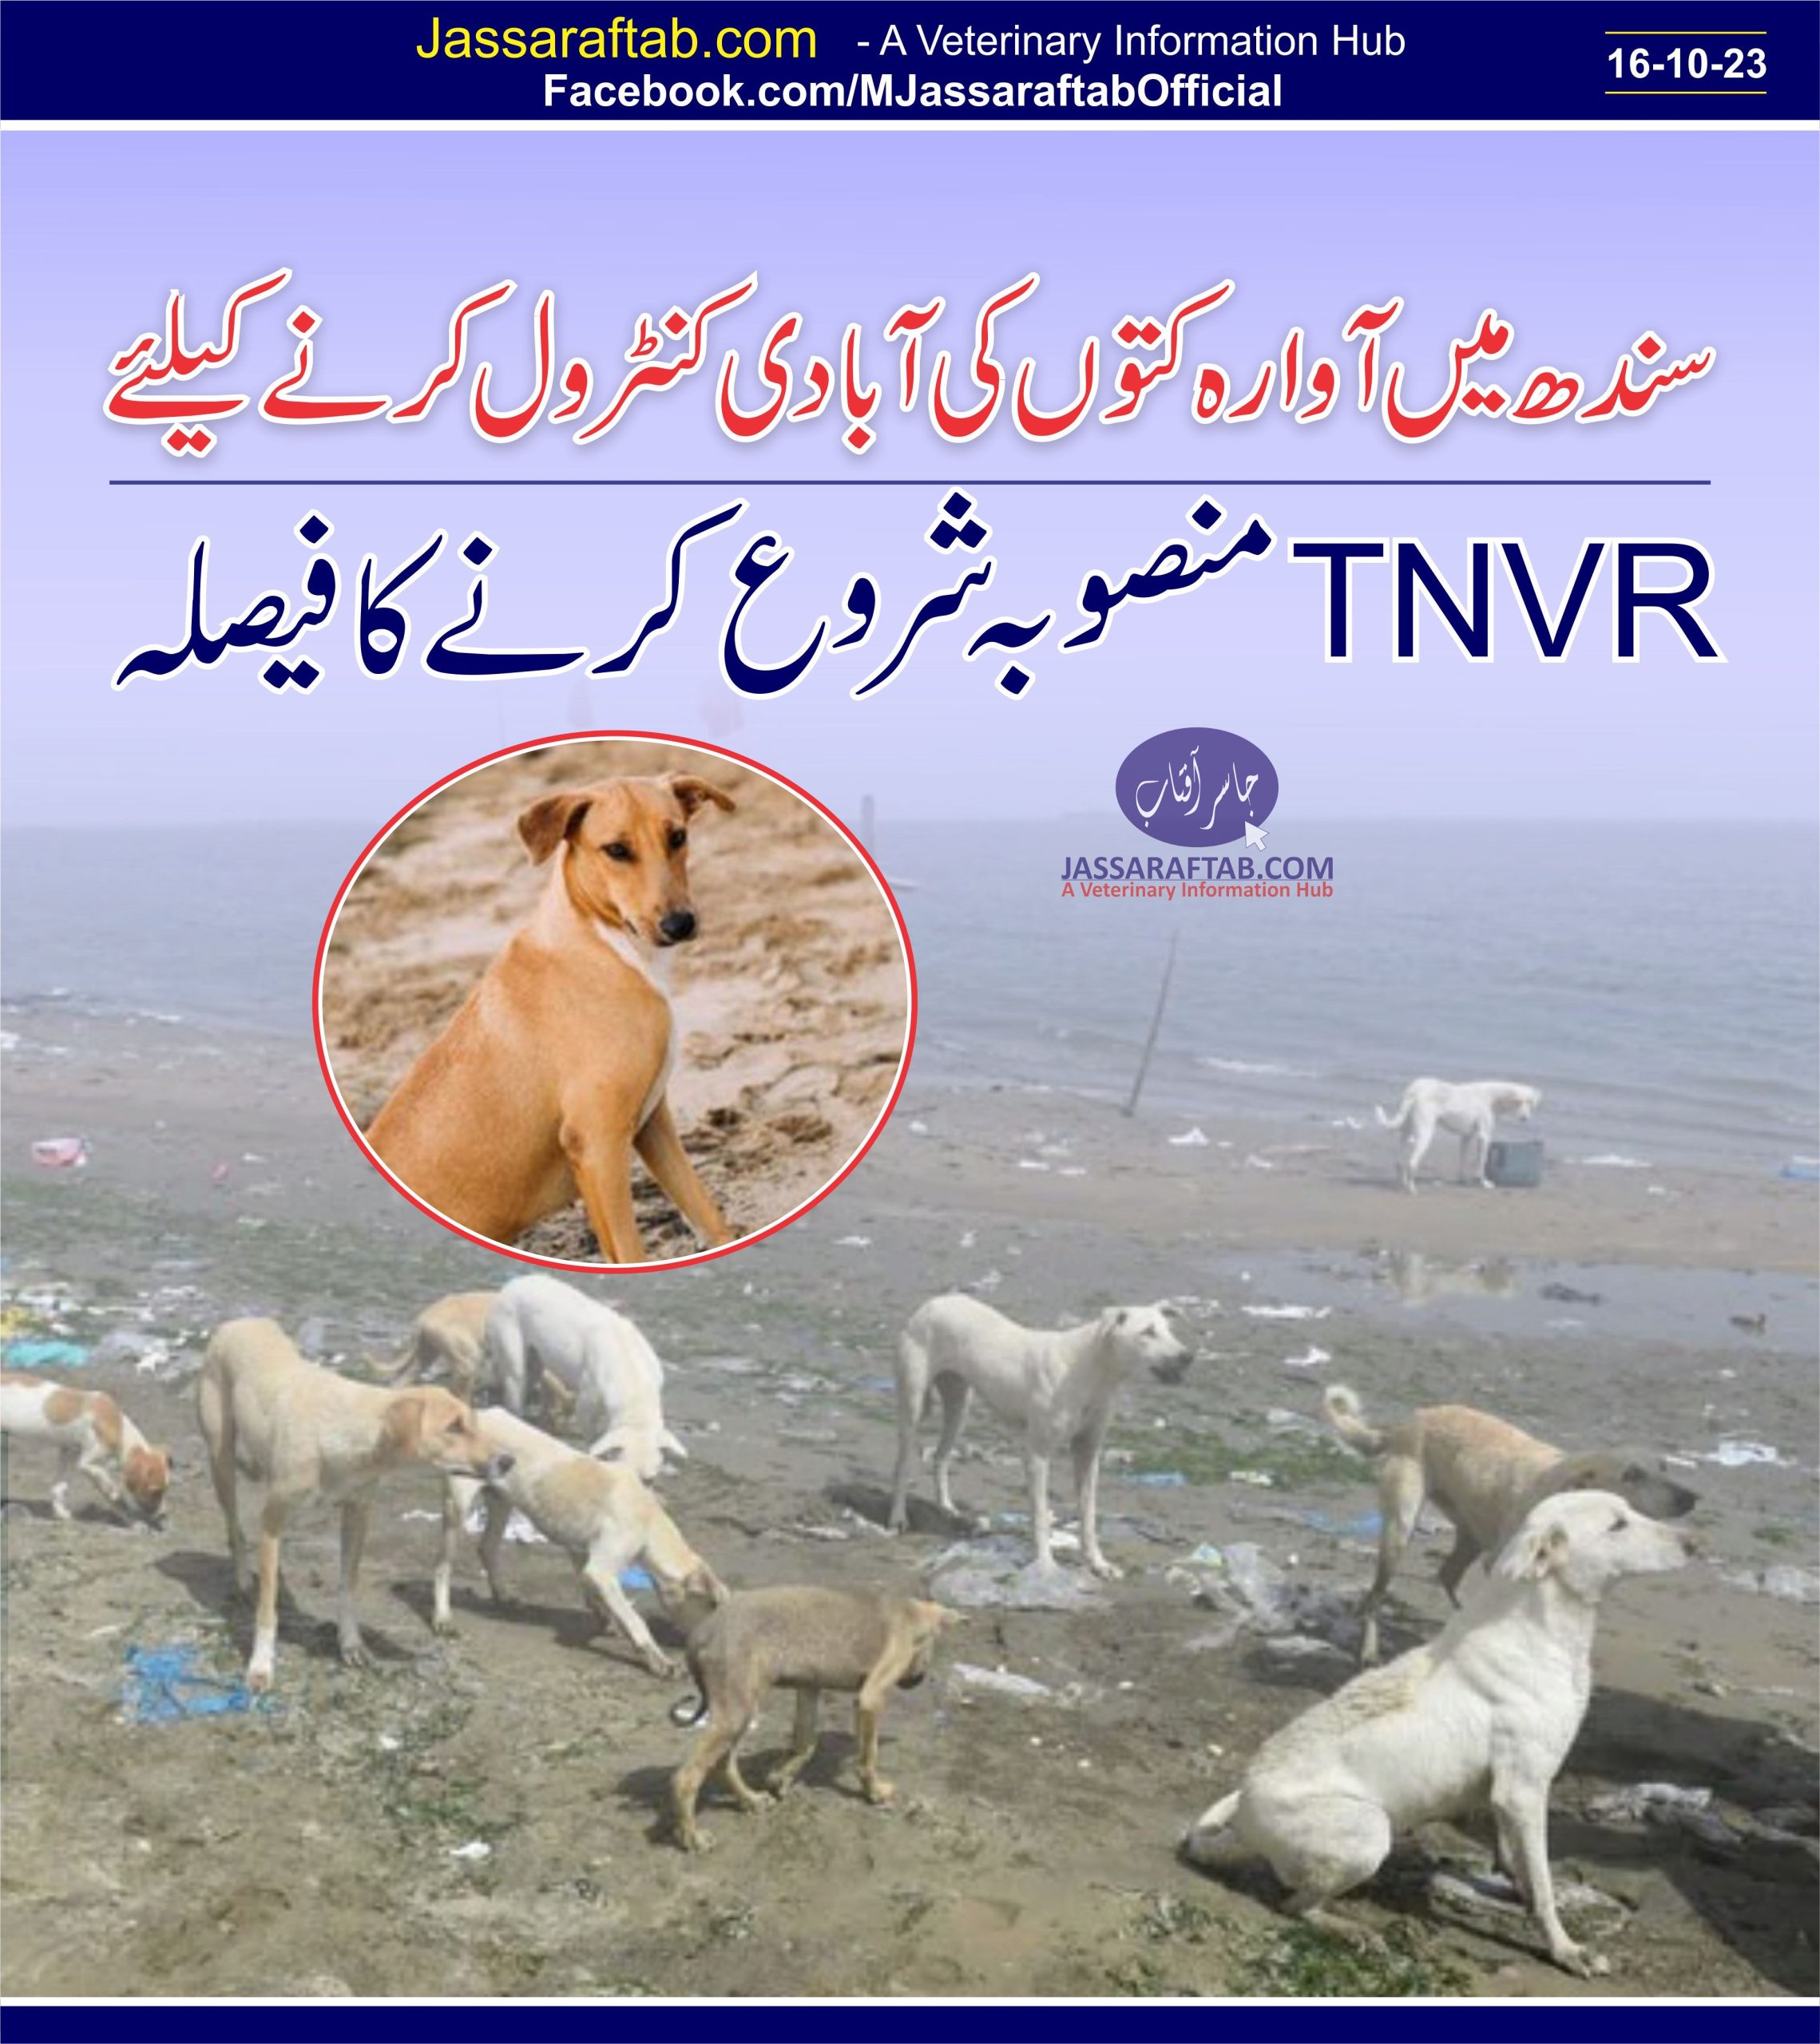 TNVR project launched to control Stray Dog population